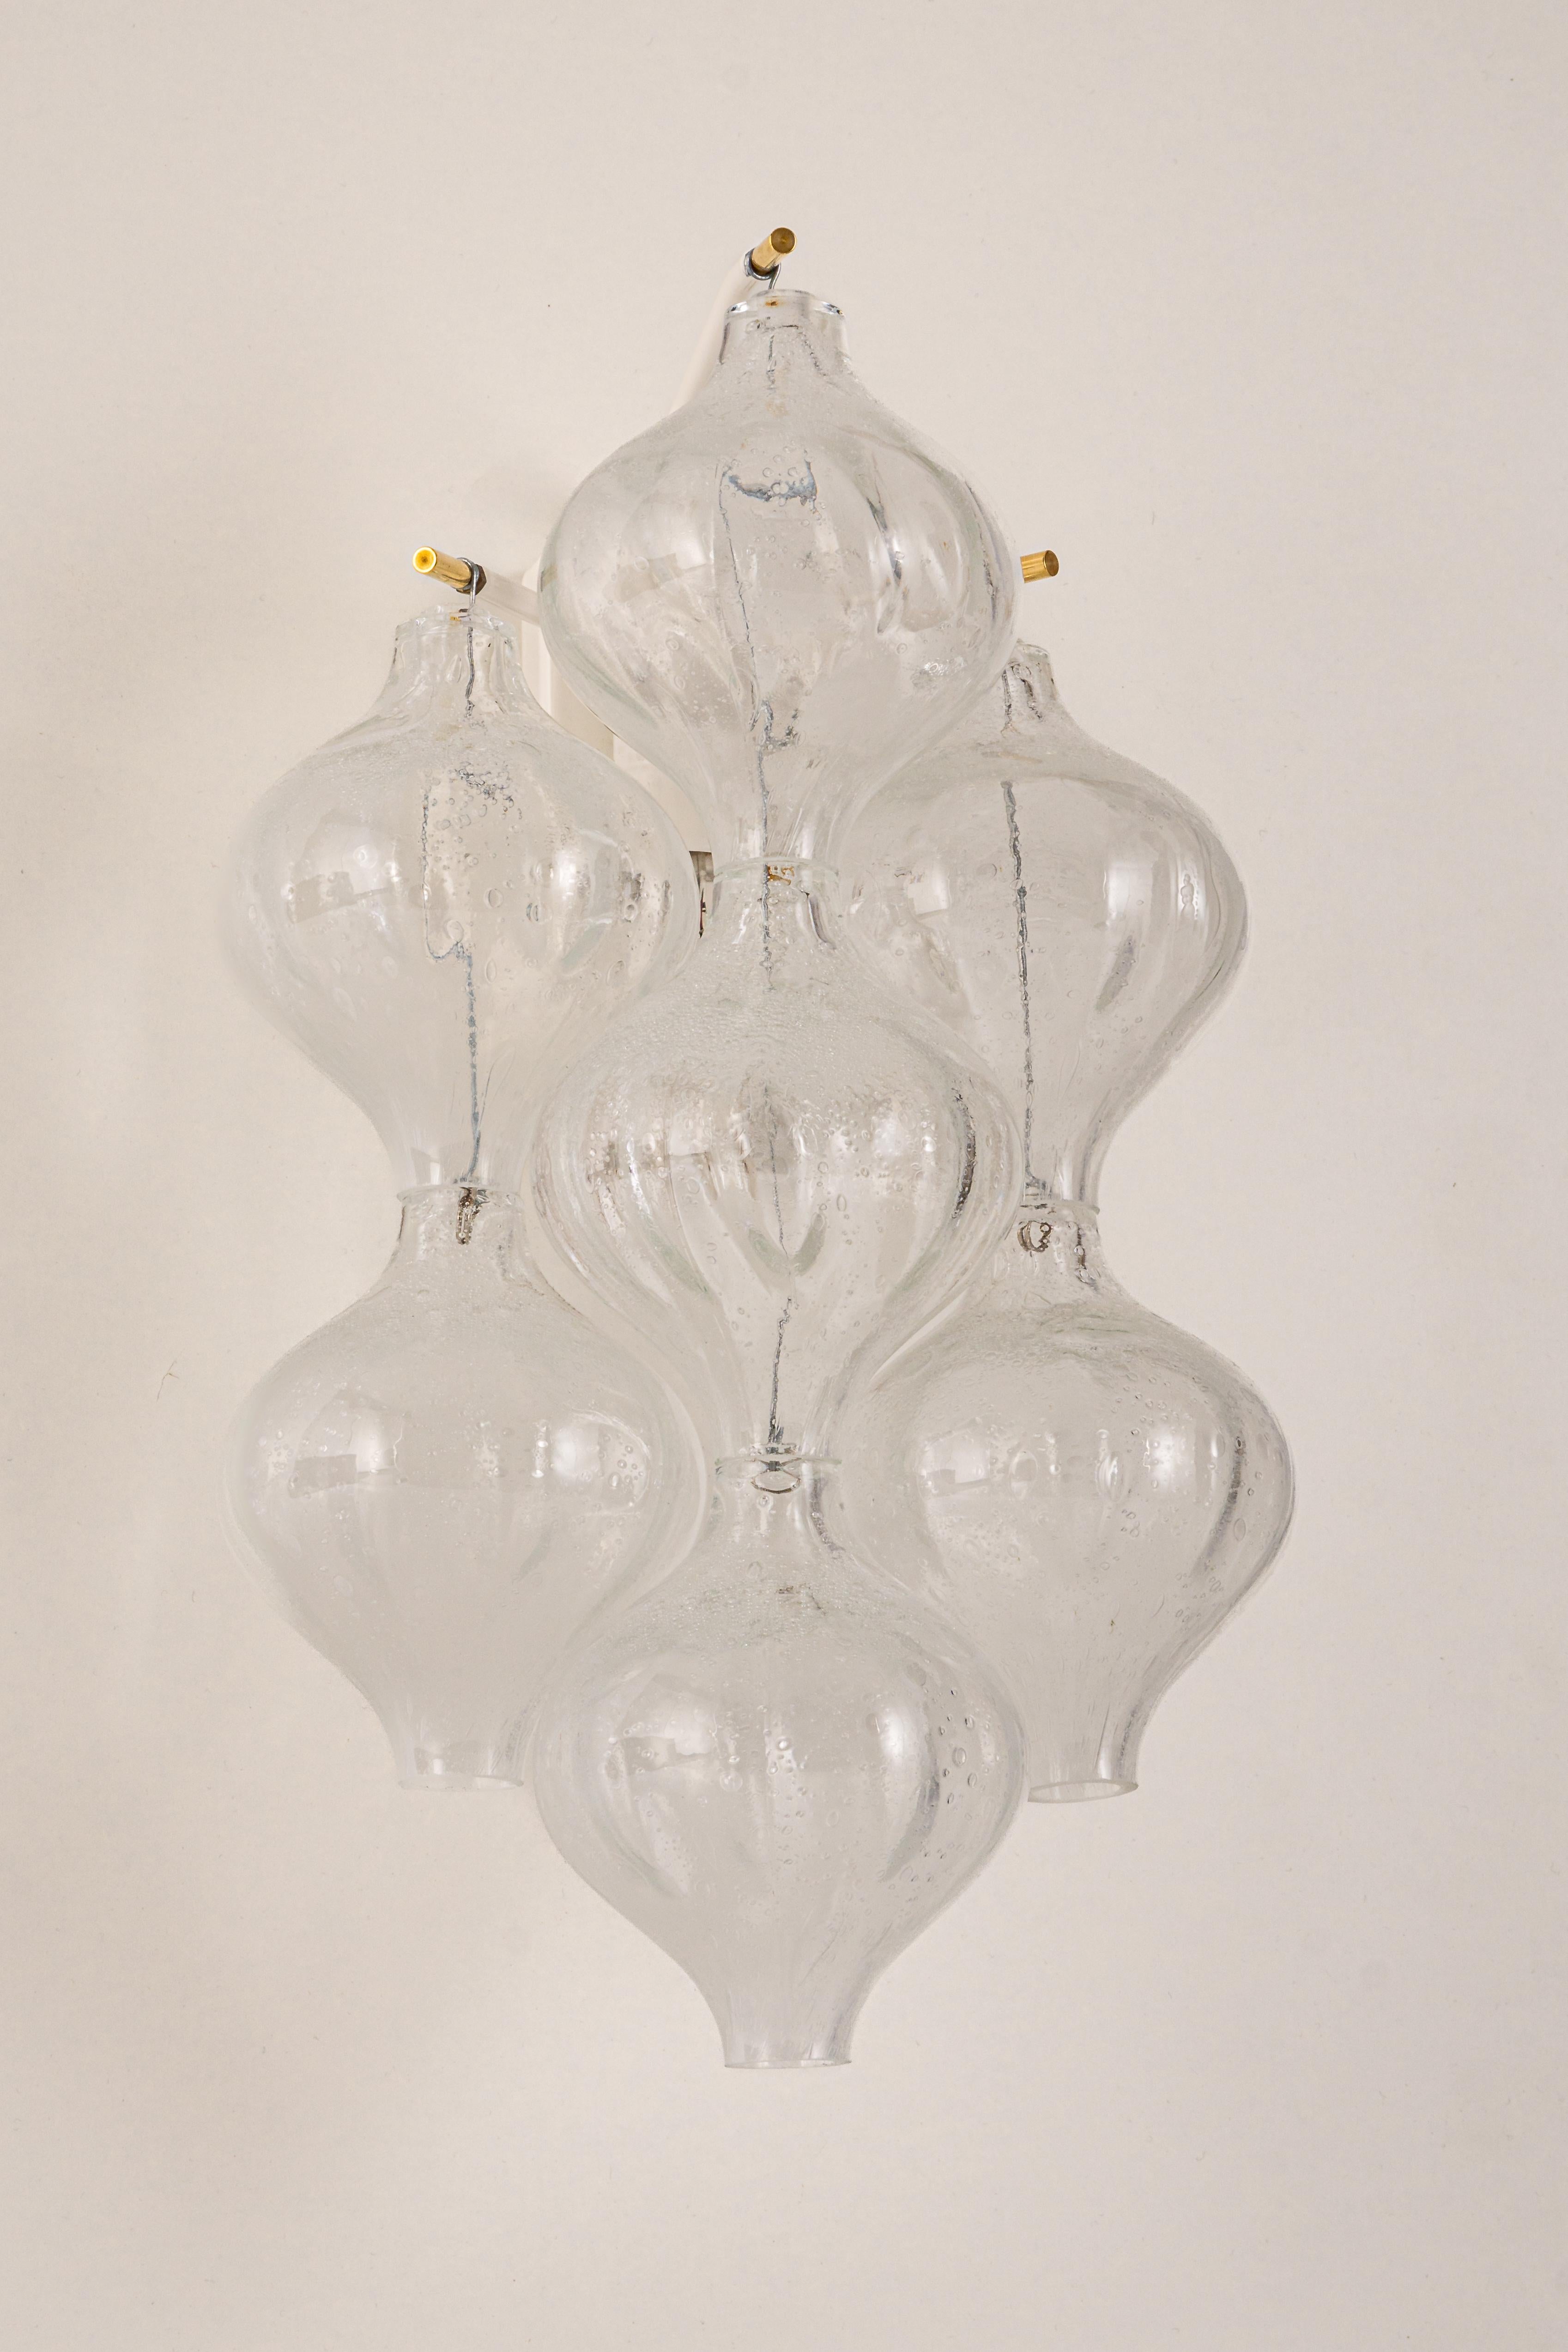 Wonderful pair of mid-century wall sconces, made by Kalmar, Austria, manufactured, circa 1970-1979.
Each tulip-shaped glass is handmade which makes each glass piece is a unique piece. Each sconce is made of 7 glass pieces on a white enameled metal